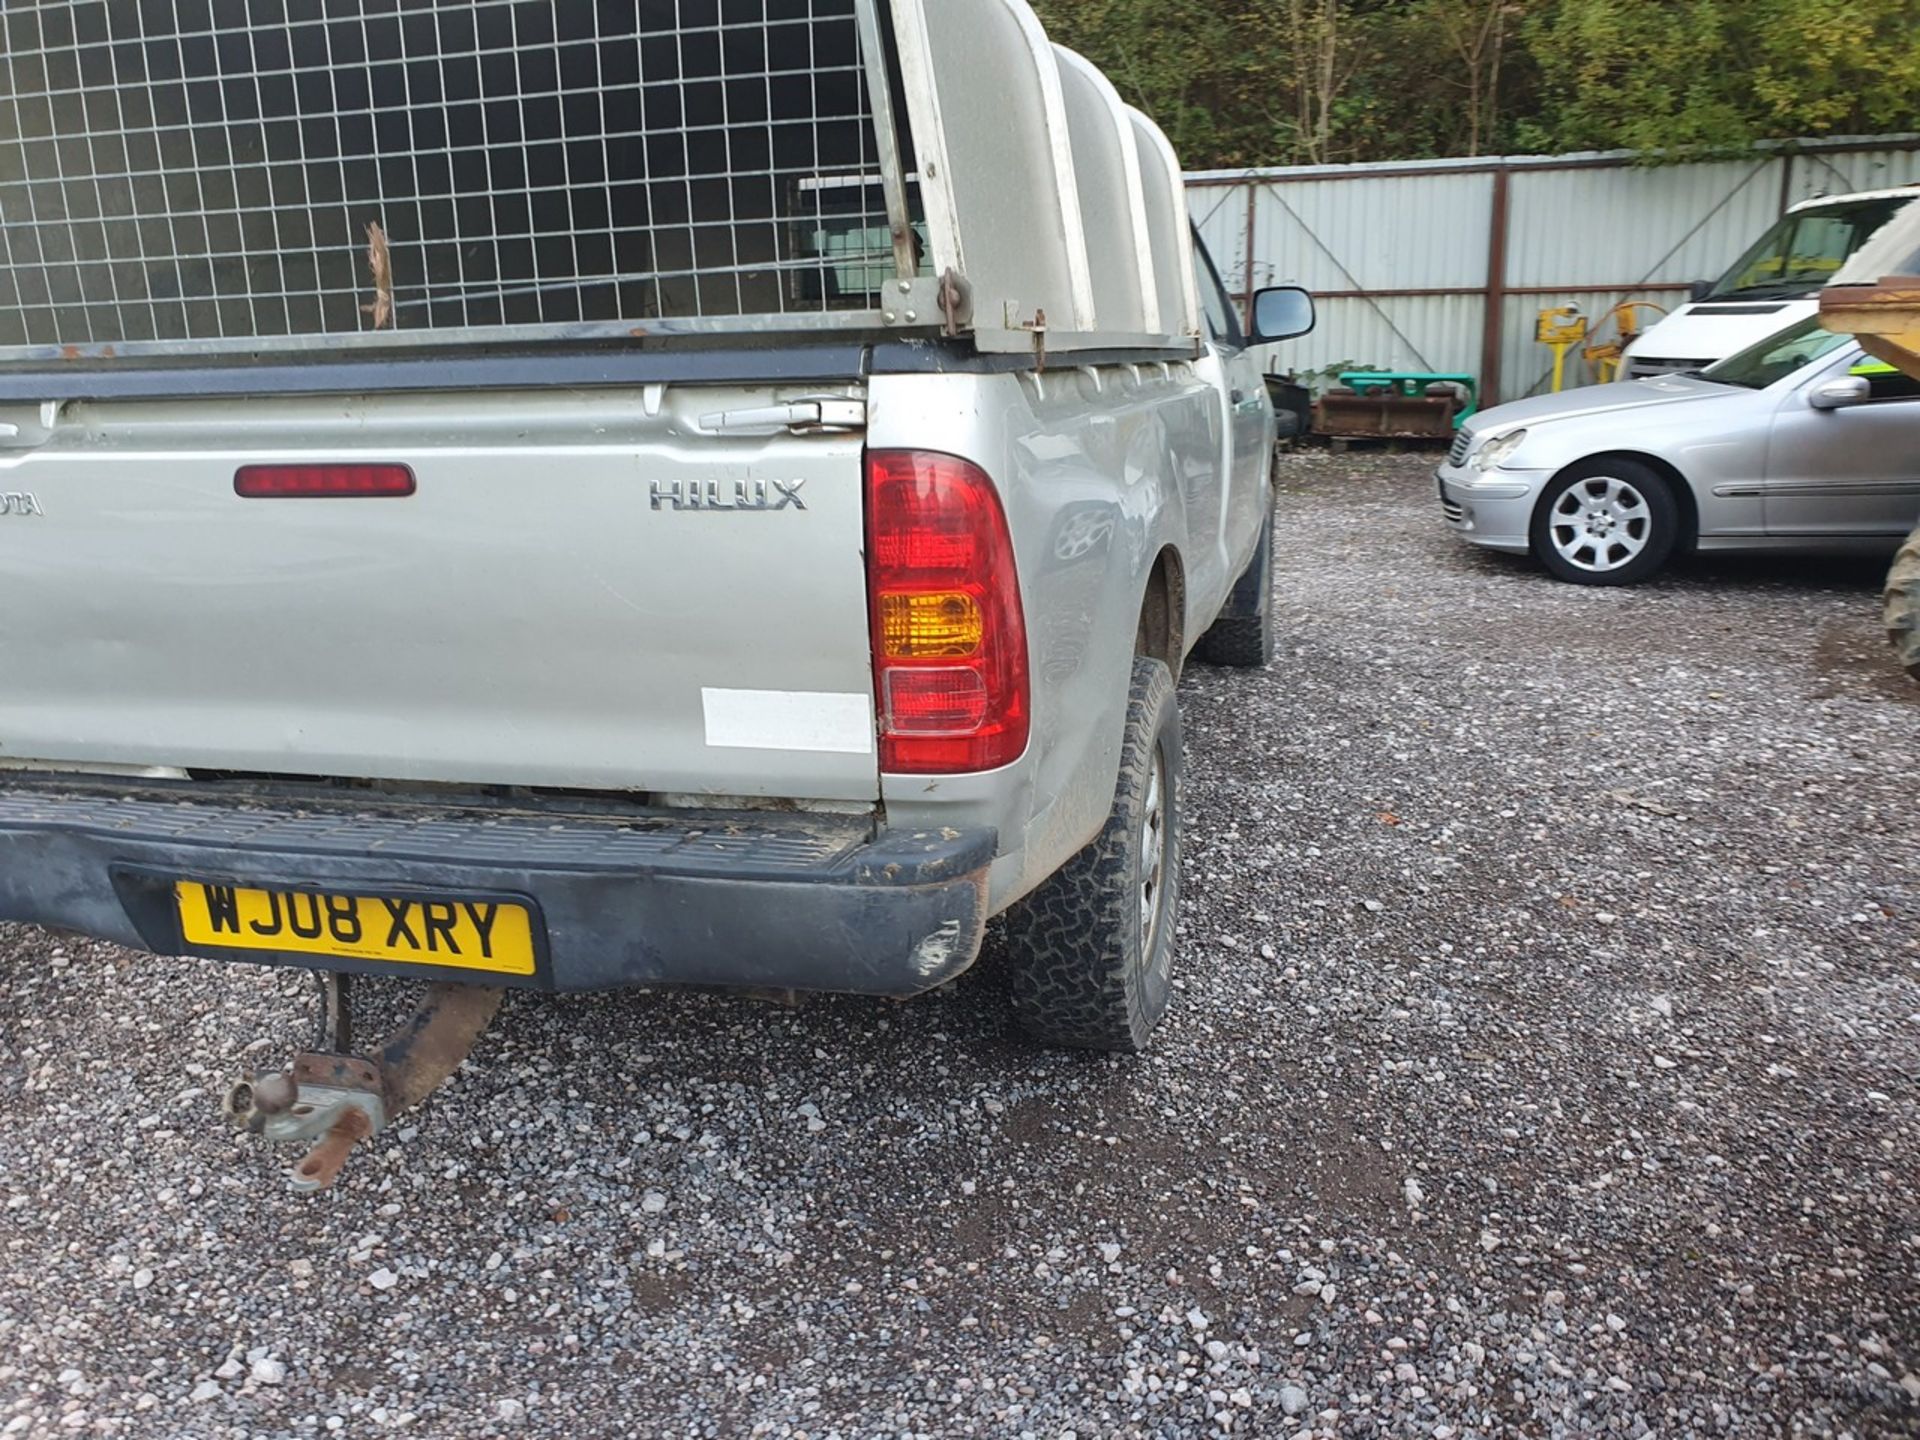 08/08 TOYOTA HILUX HL2 D-4D 4X4 S/C - 2494cc 2dr 4x4 (Silver, 78k) - Image 27 of 32